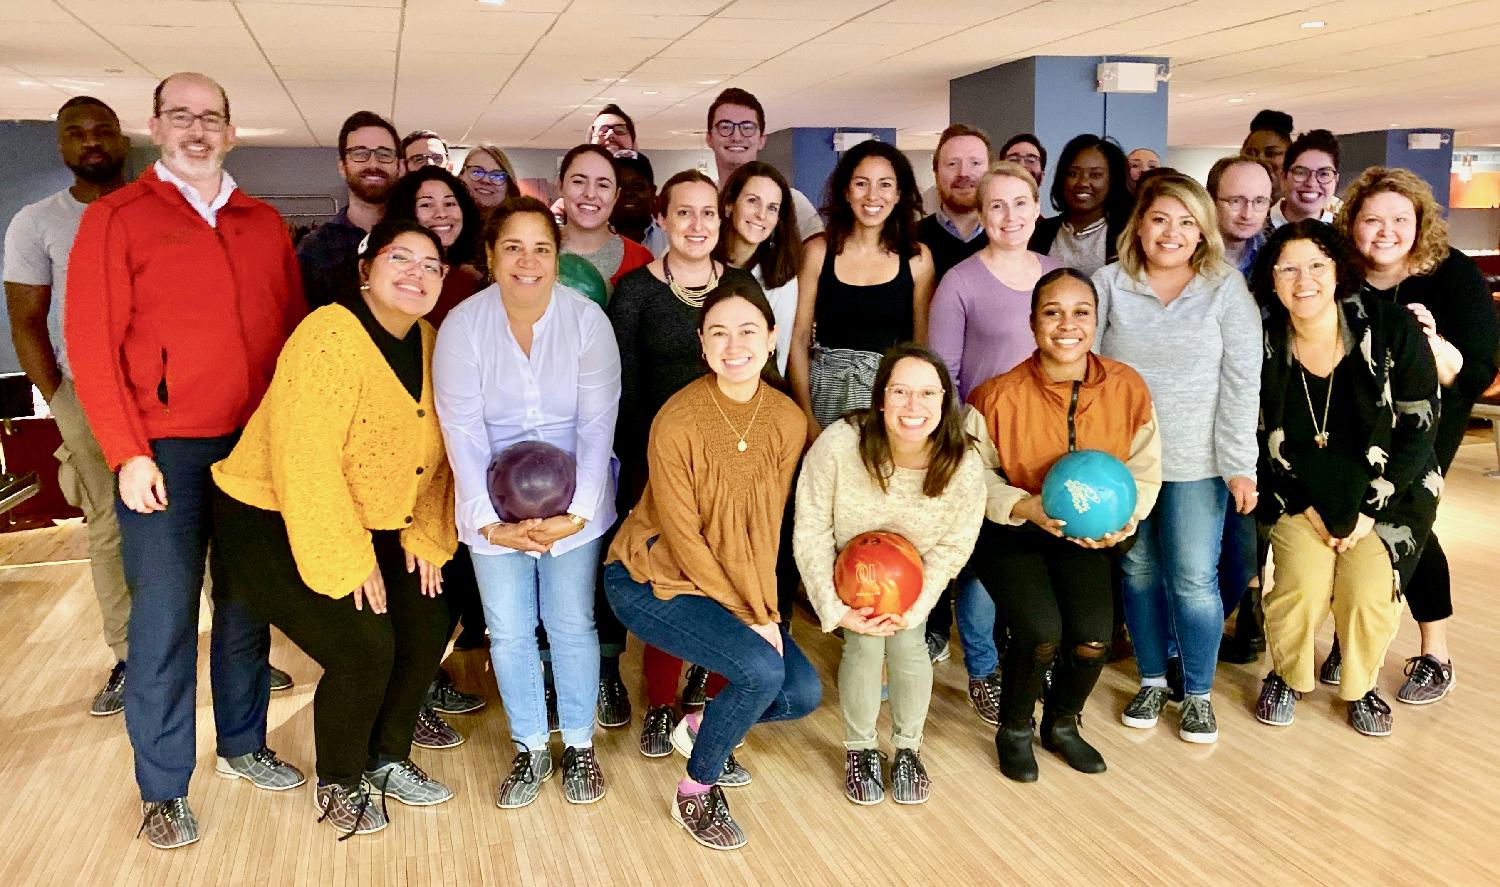 In February 2020, Democracy Fund staff took a Friday afternoon off to enjoy friendly competition at a bowling alley.